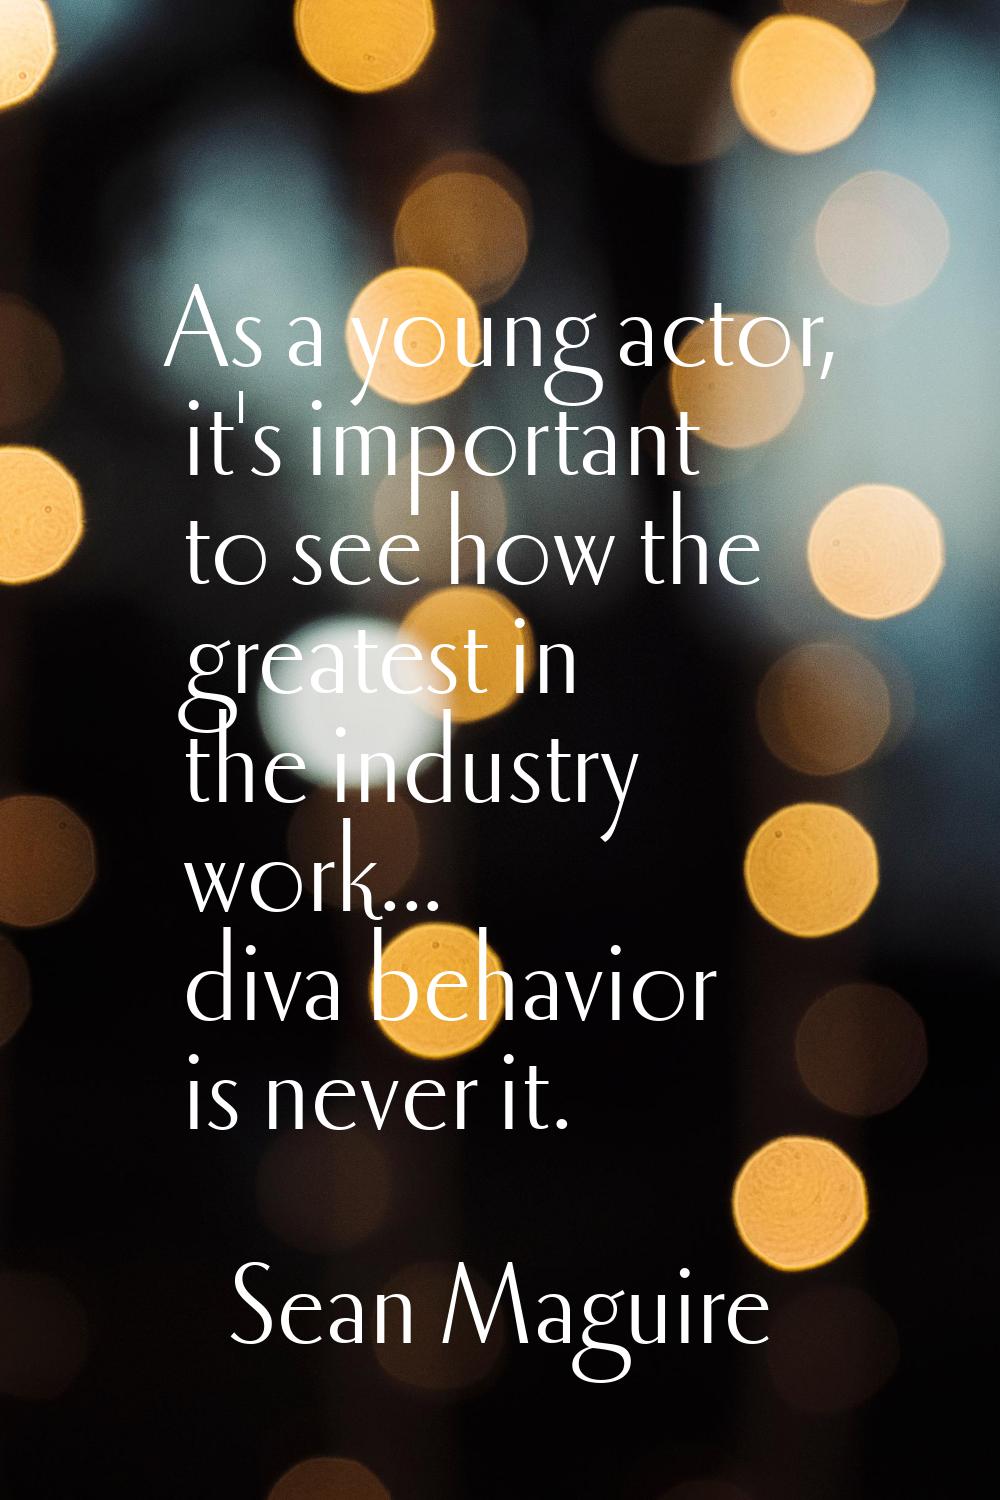 As a young actor, it's important to see how the greatest in the industry work... diva behavior is n